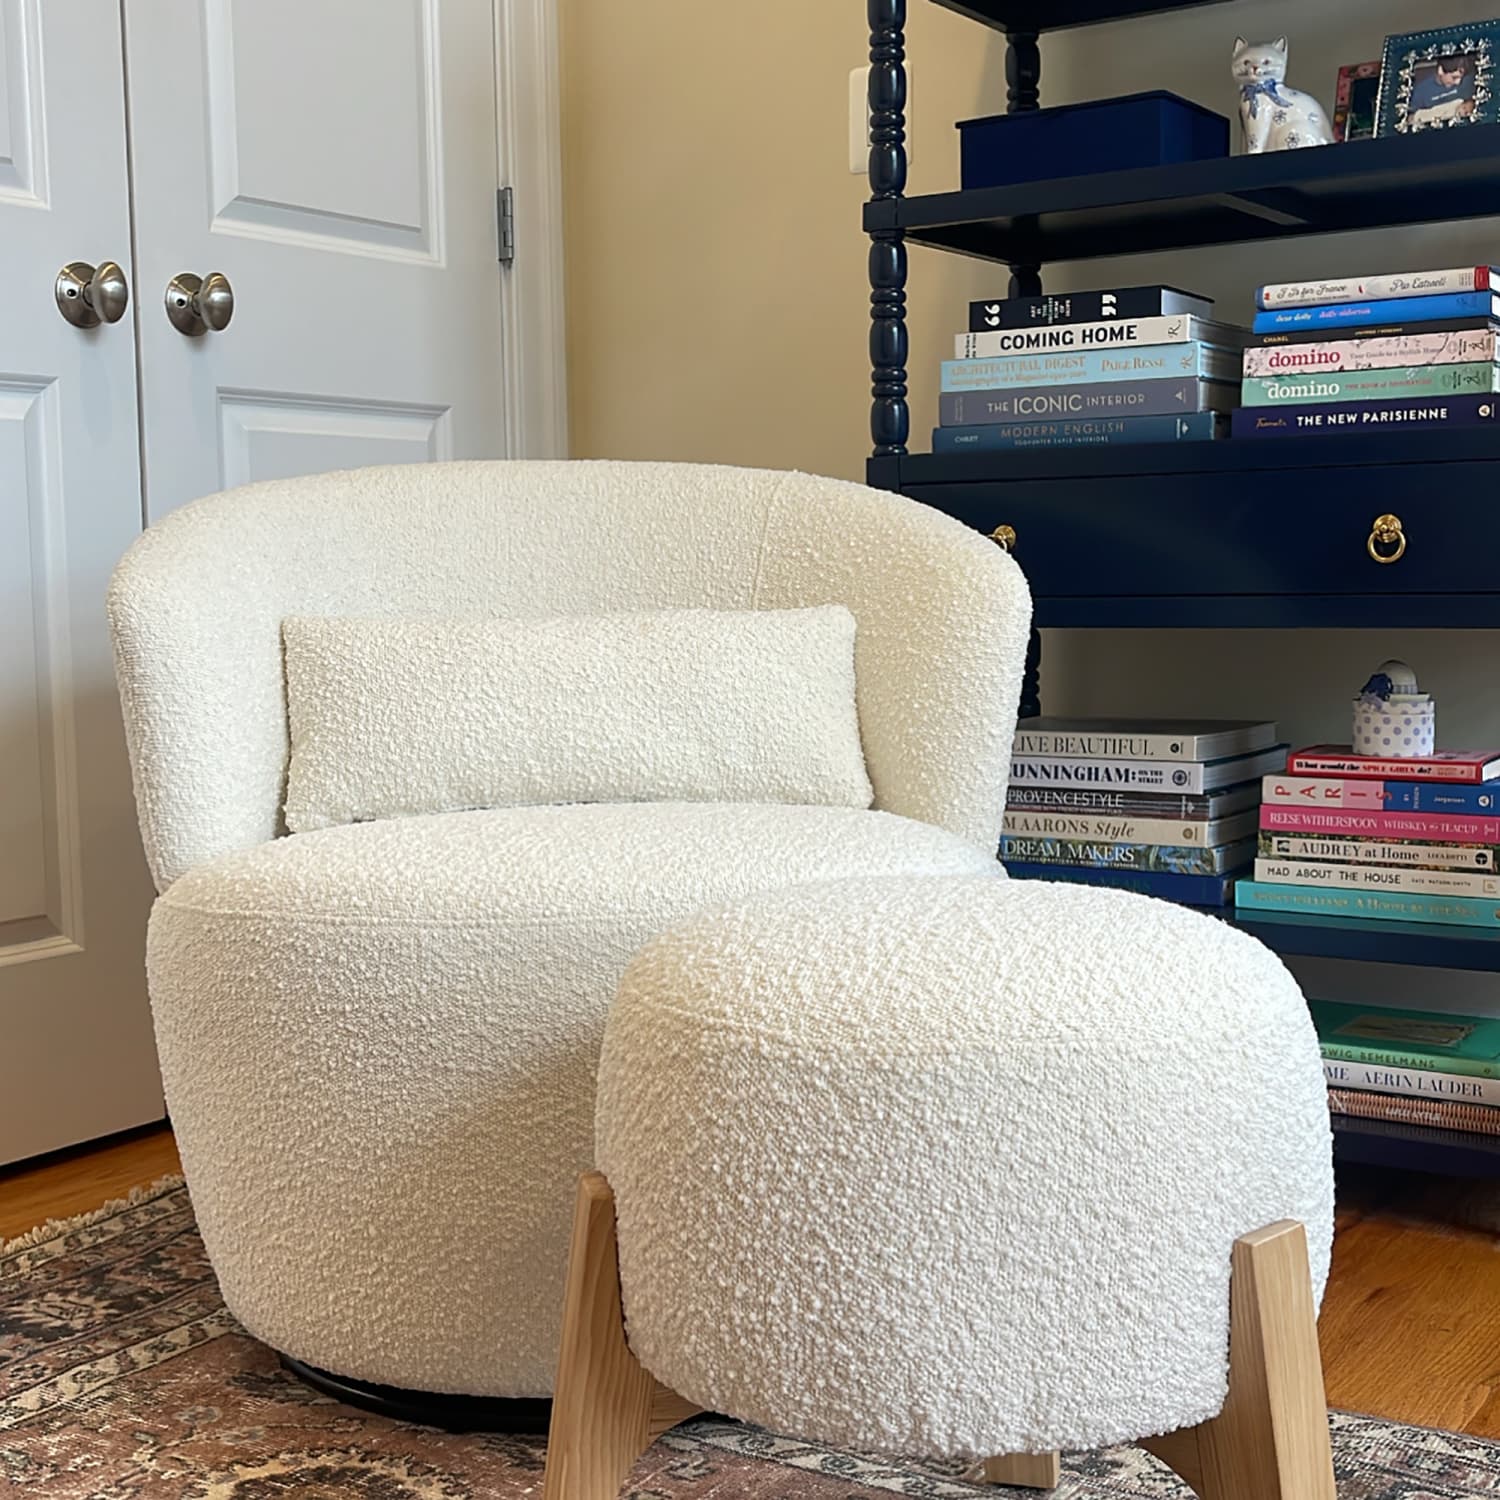 Small Bedroom Chairs: 23 Of The Best Styles To Make The Most Of The Space  You Have